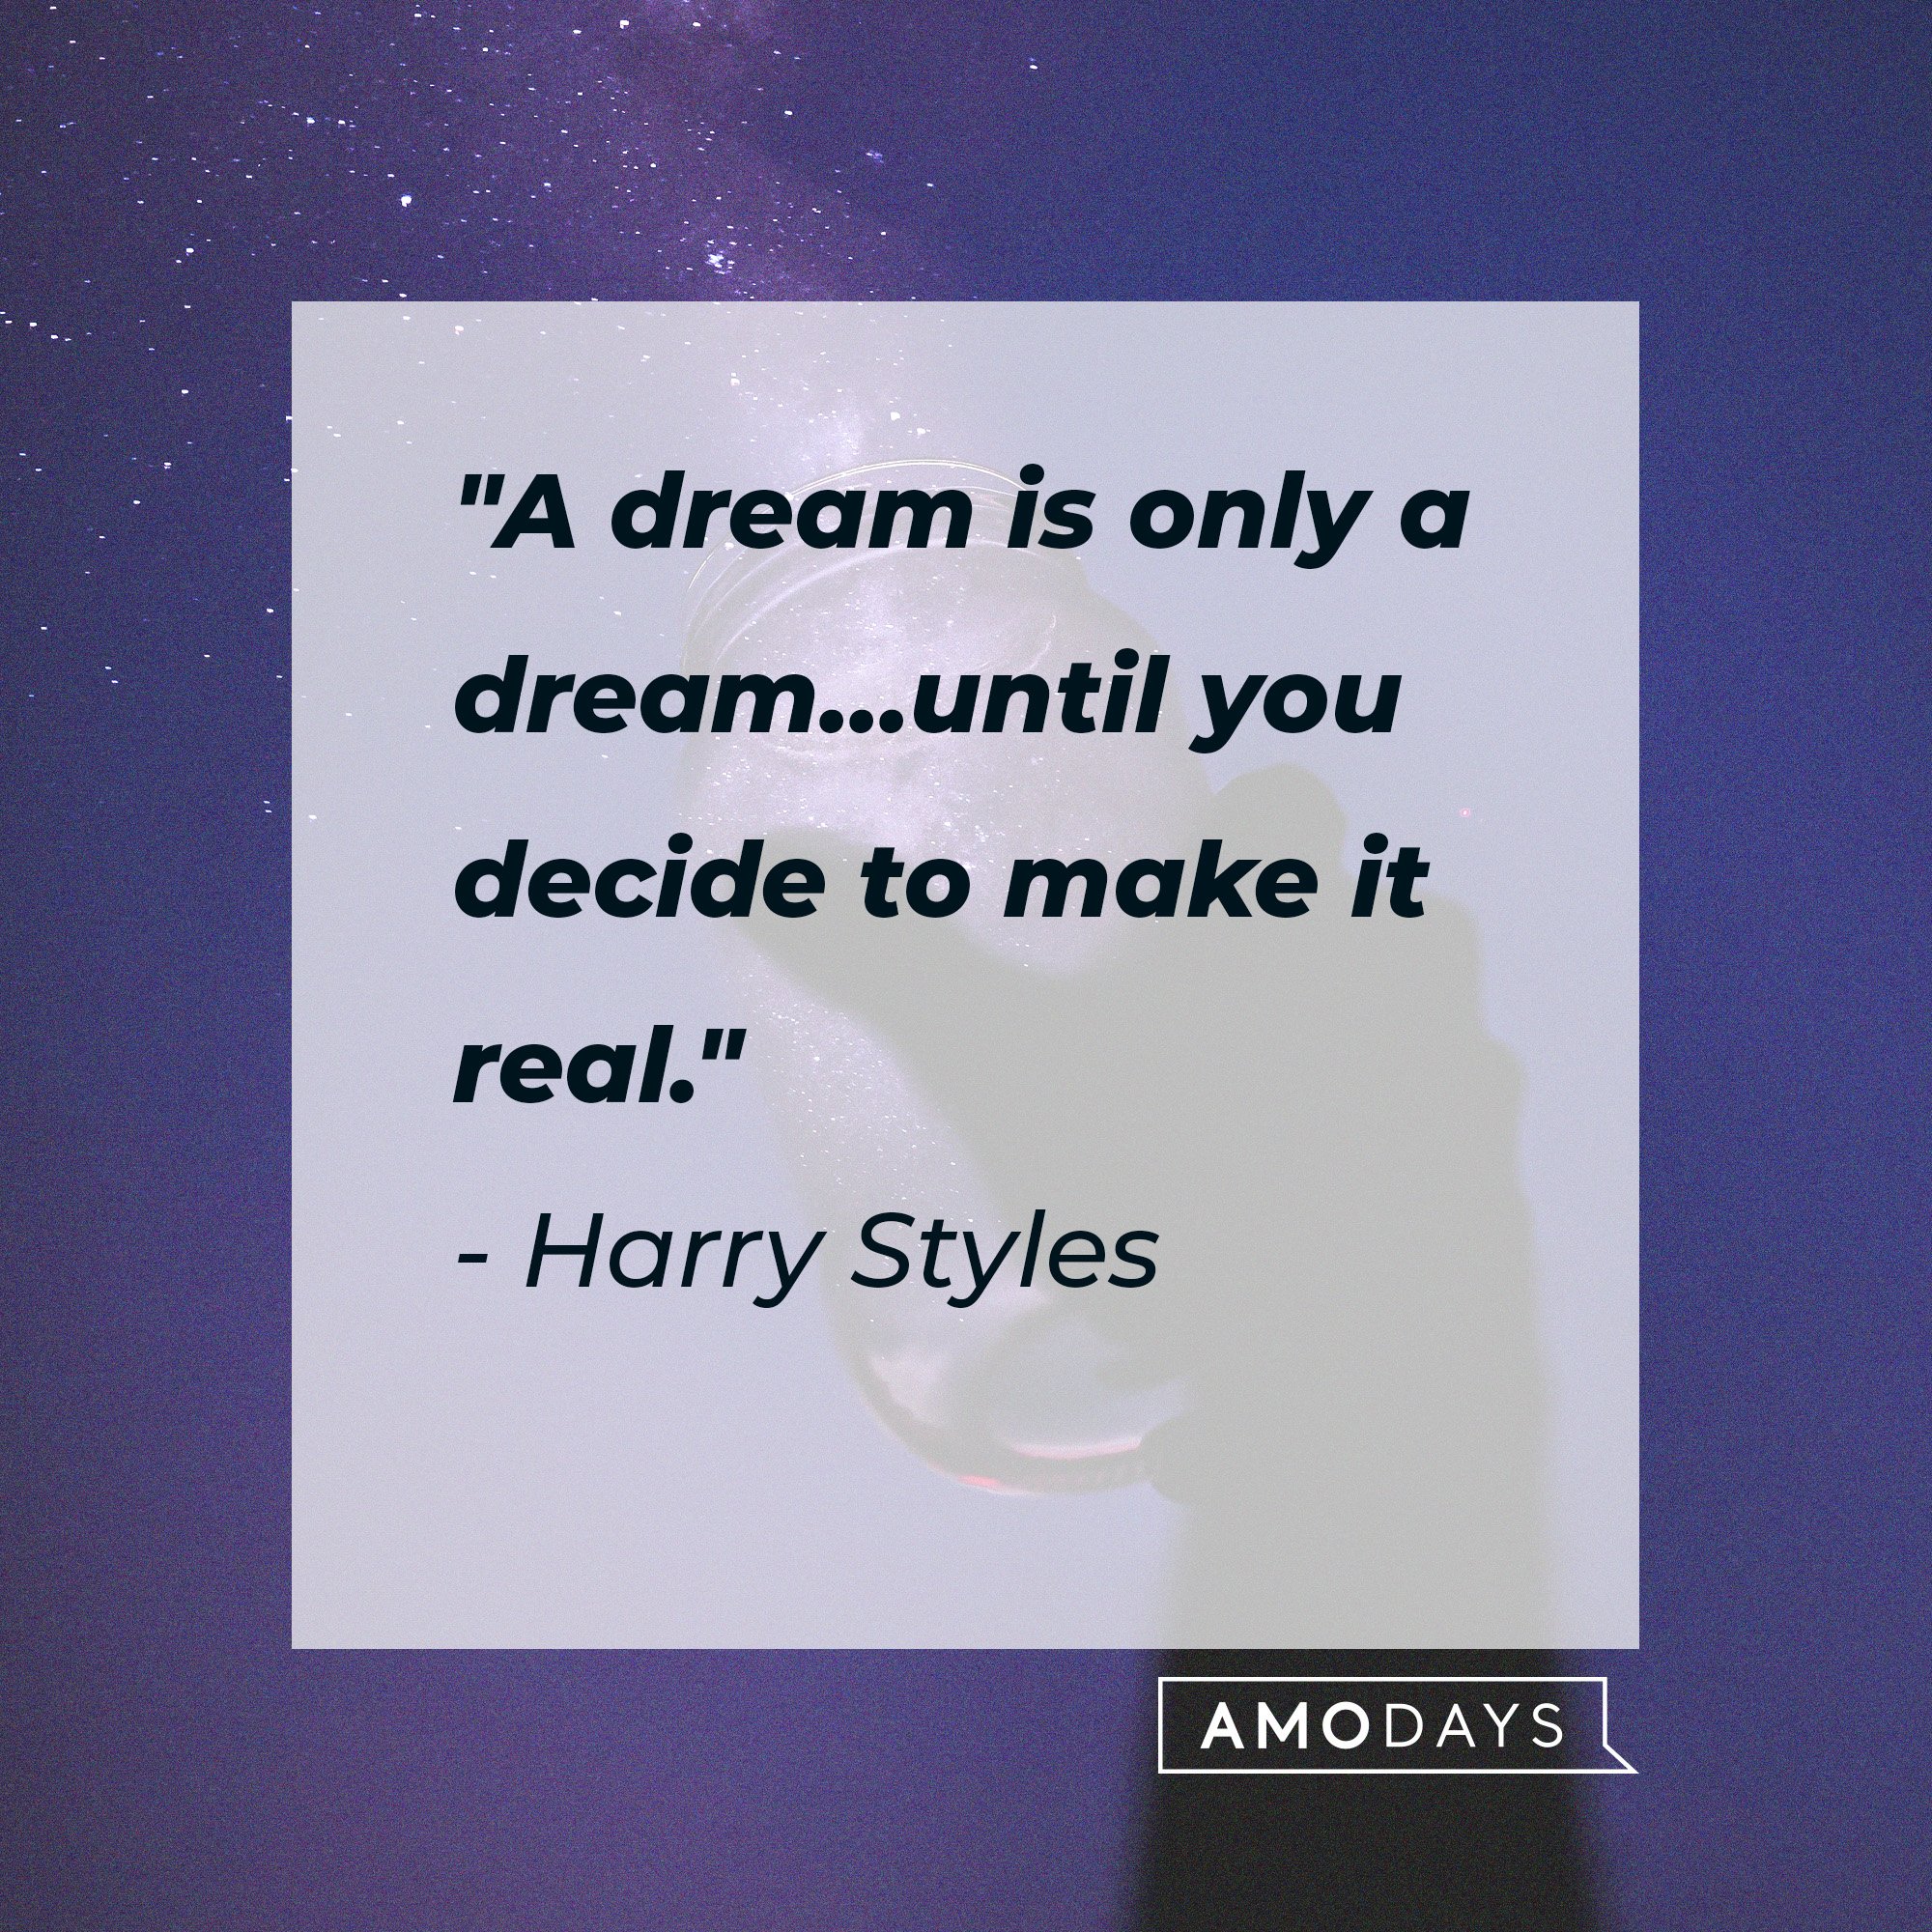 Harry Styles’ quote: "A dream is only a dream.. until you decide to make it real." |  Source: AmoDays